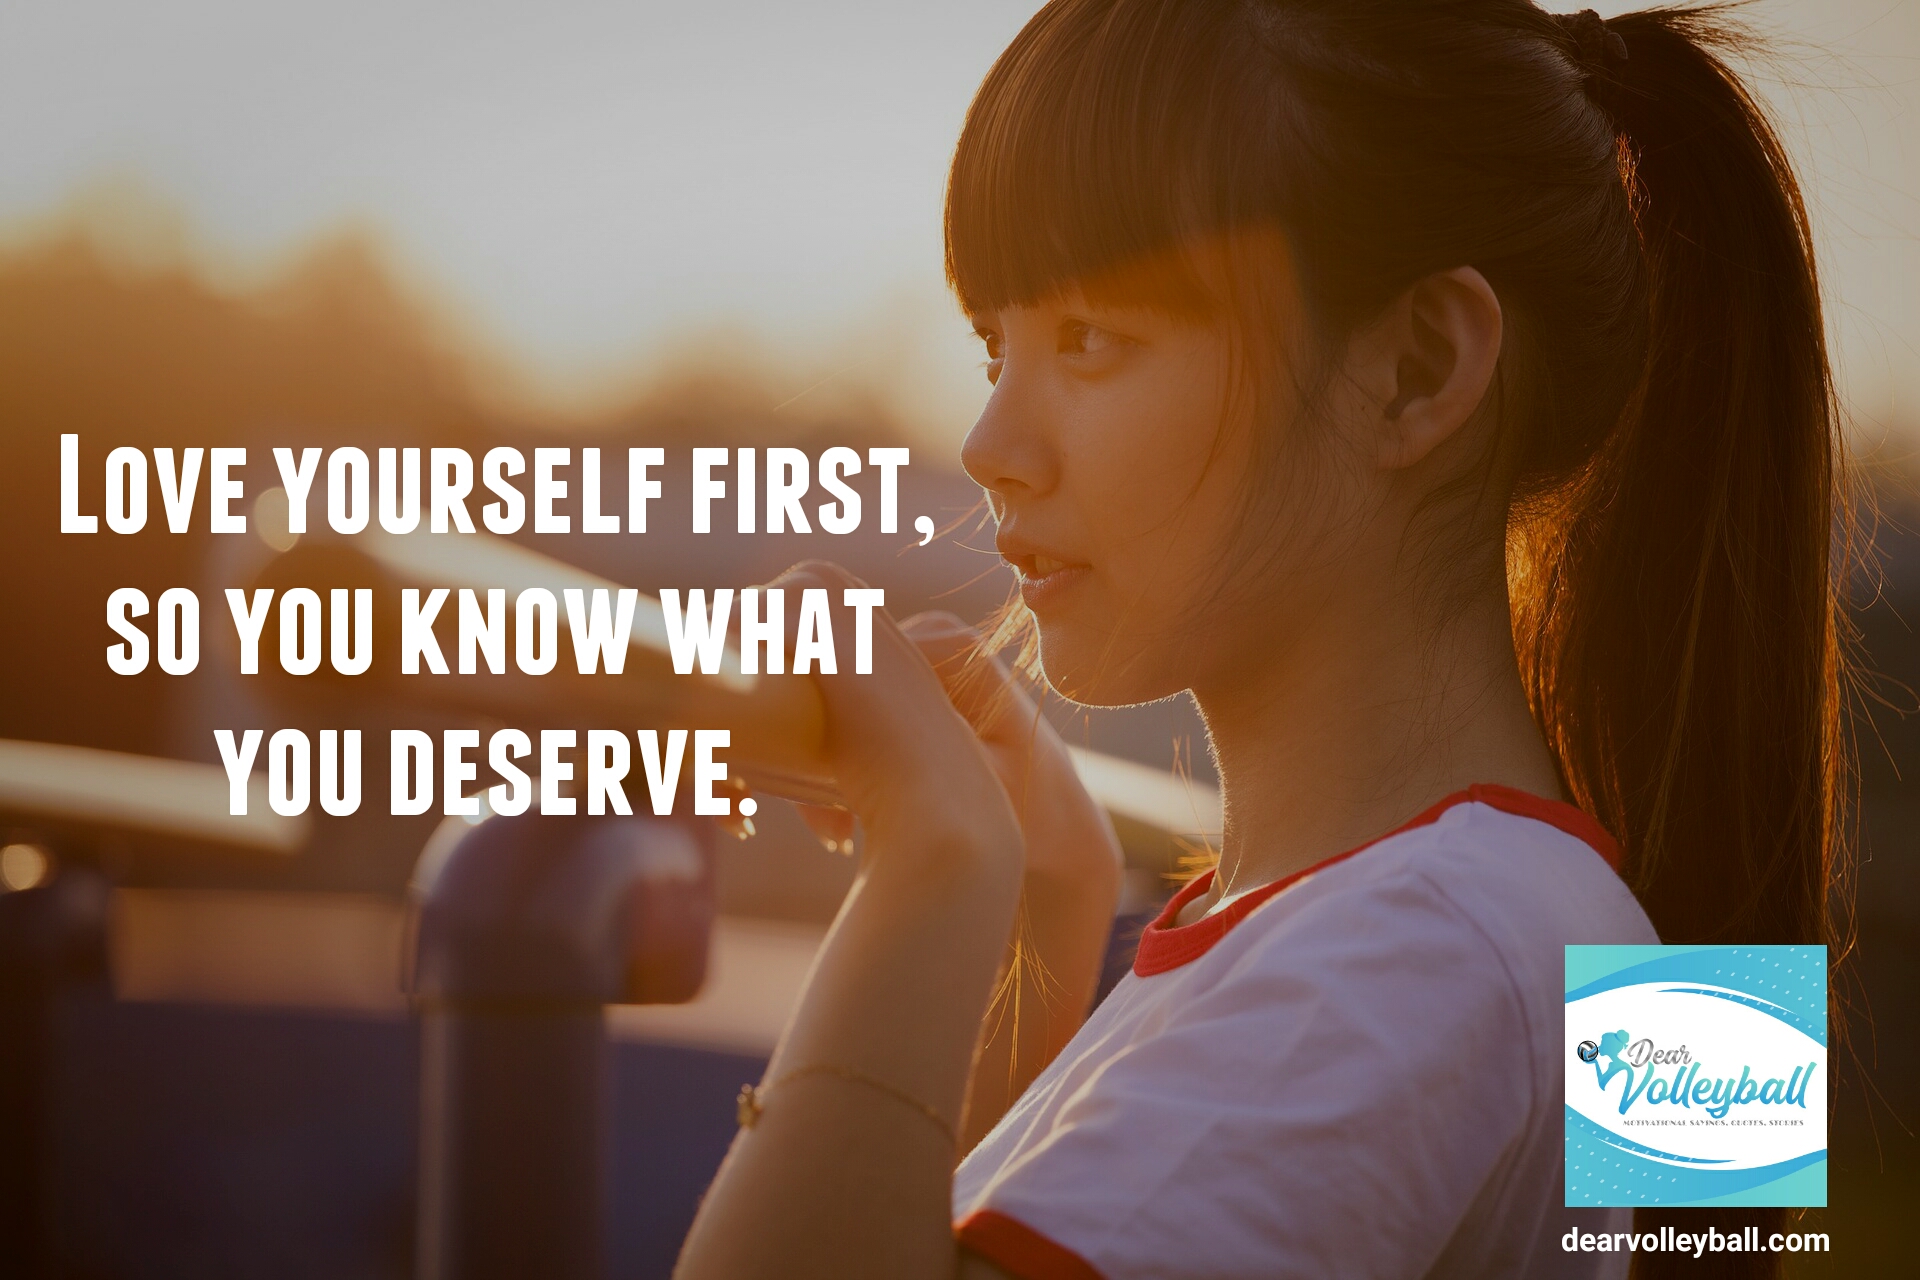 "Love yourself first, so you know what you deserve." and other strong girls pictures paired with an inspirational volleyball quote on Dear Volleyball.com.